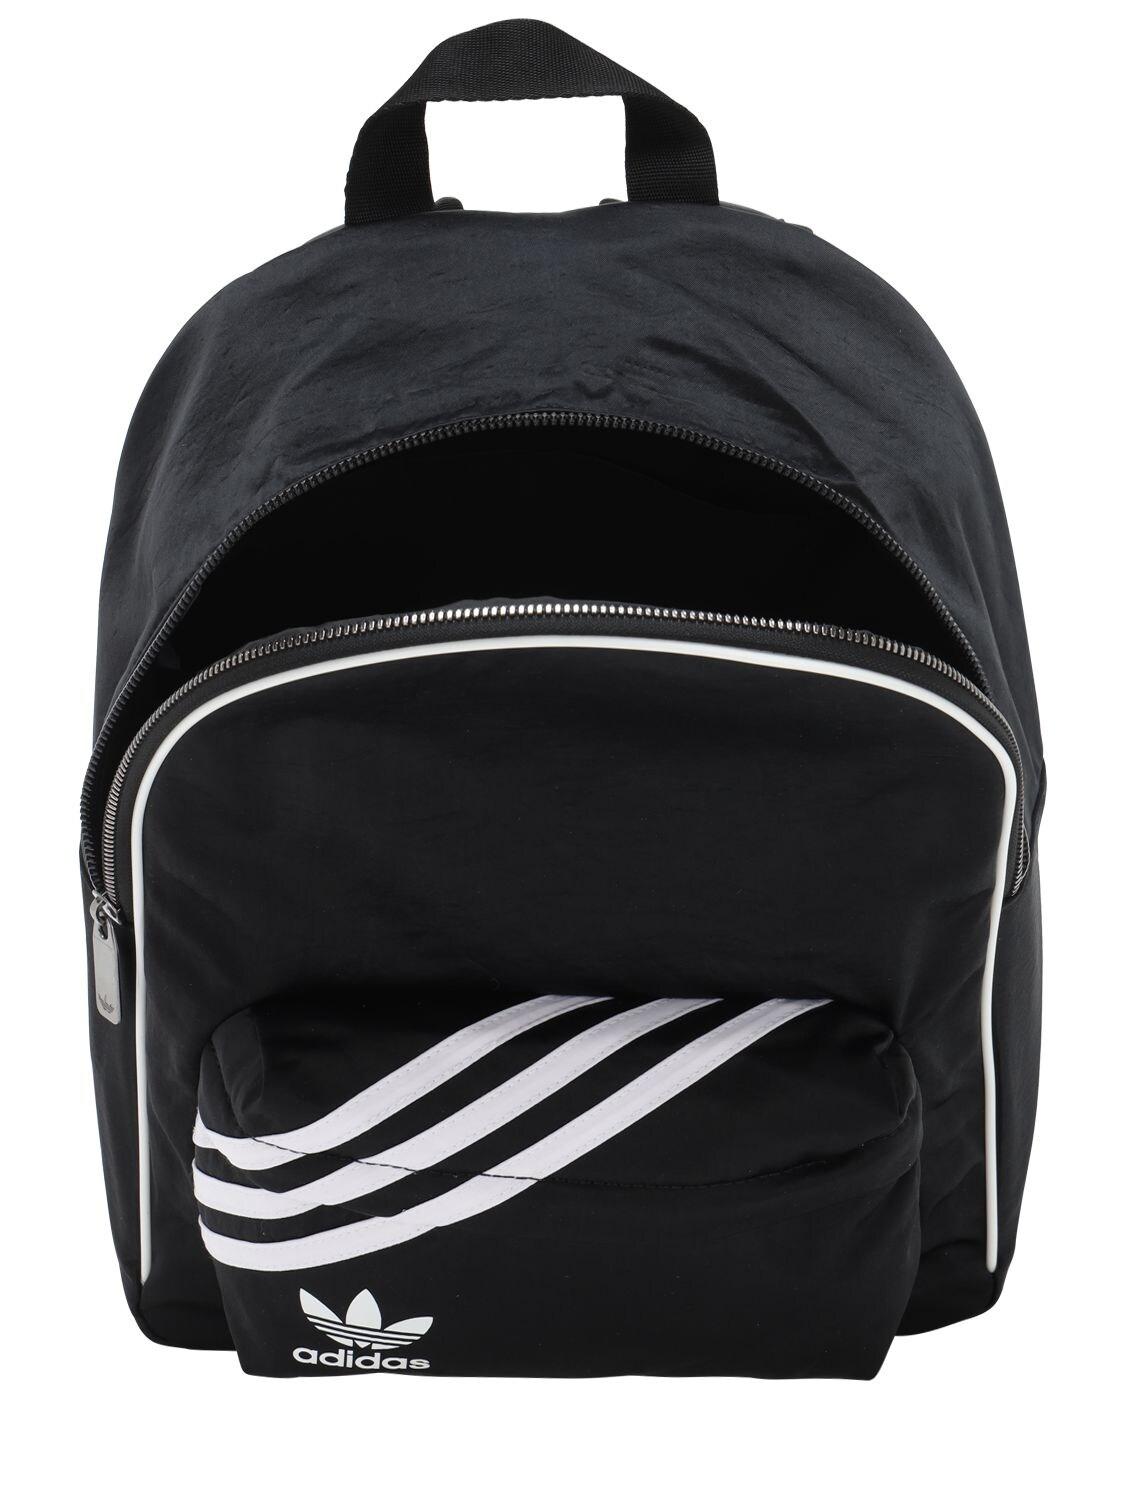 adidas Originals Synthetic Nylon Backpack in Black | Lyst